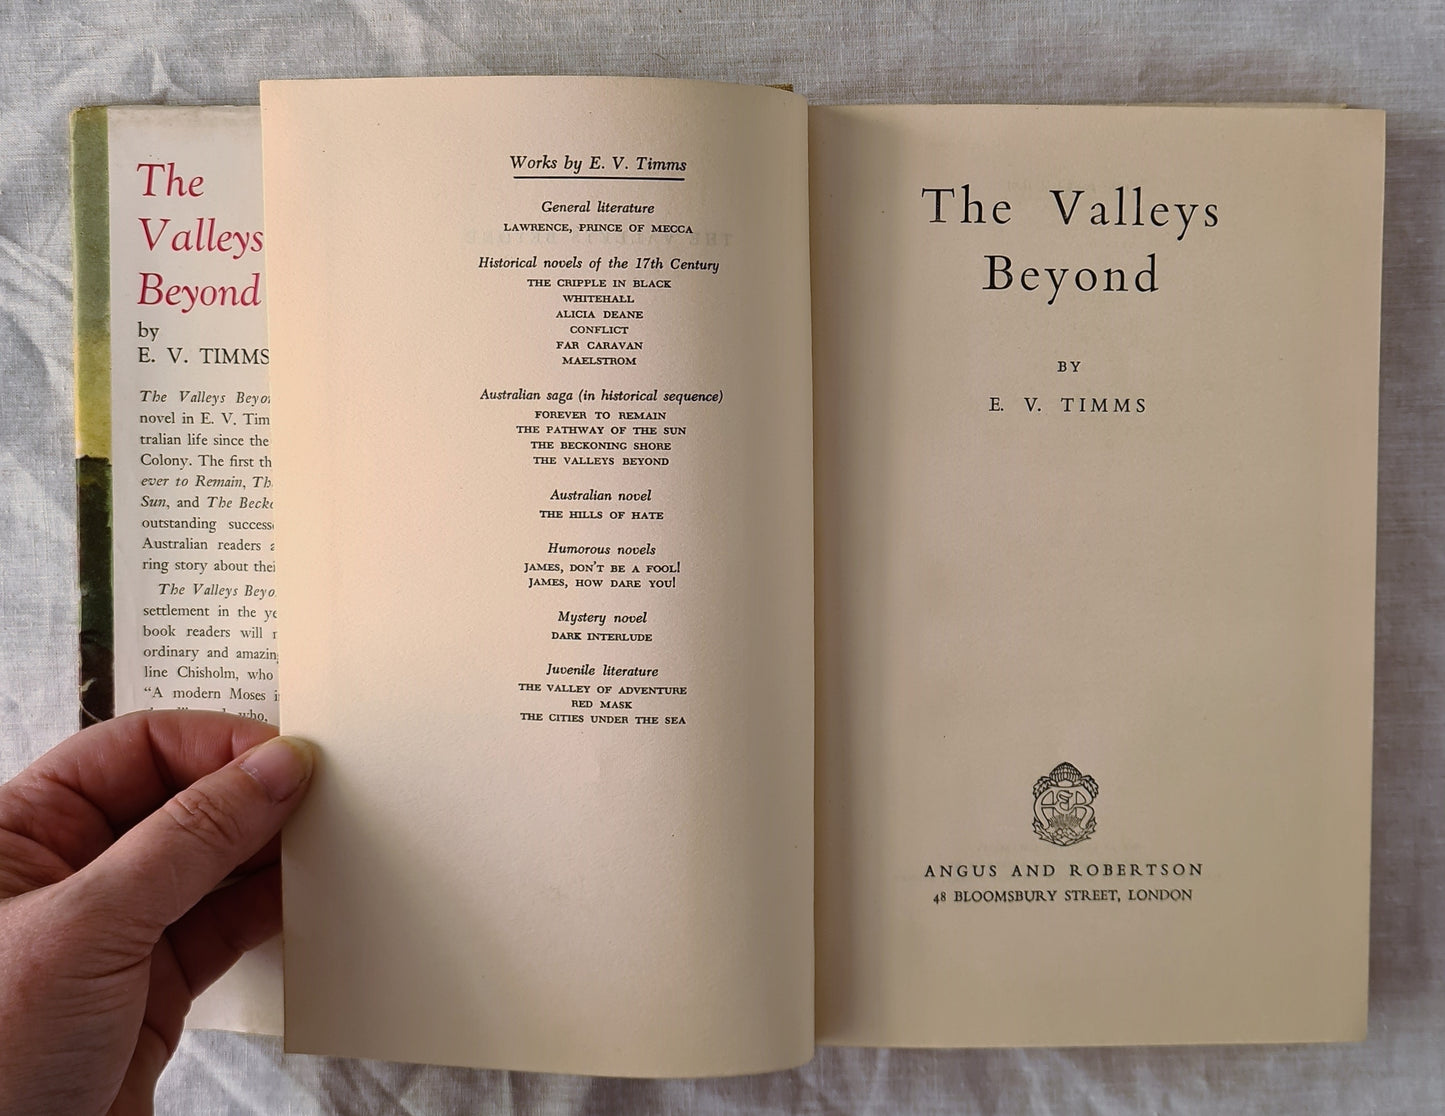 The Valleys Beyond by E. V. Timms